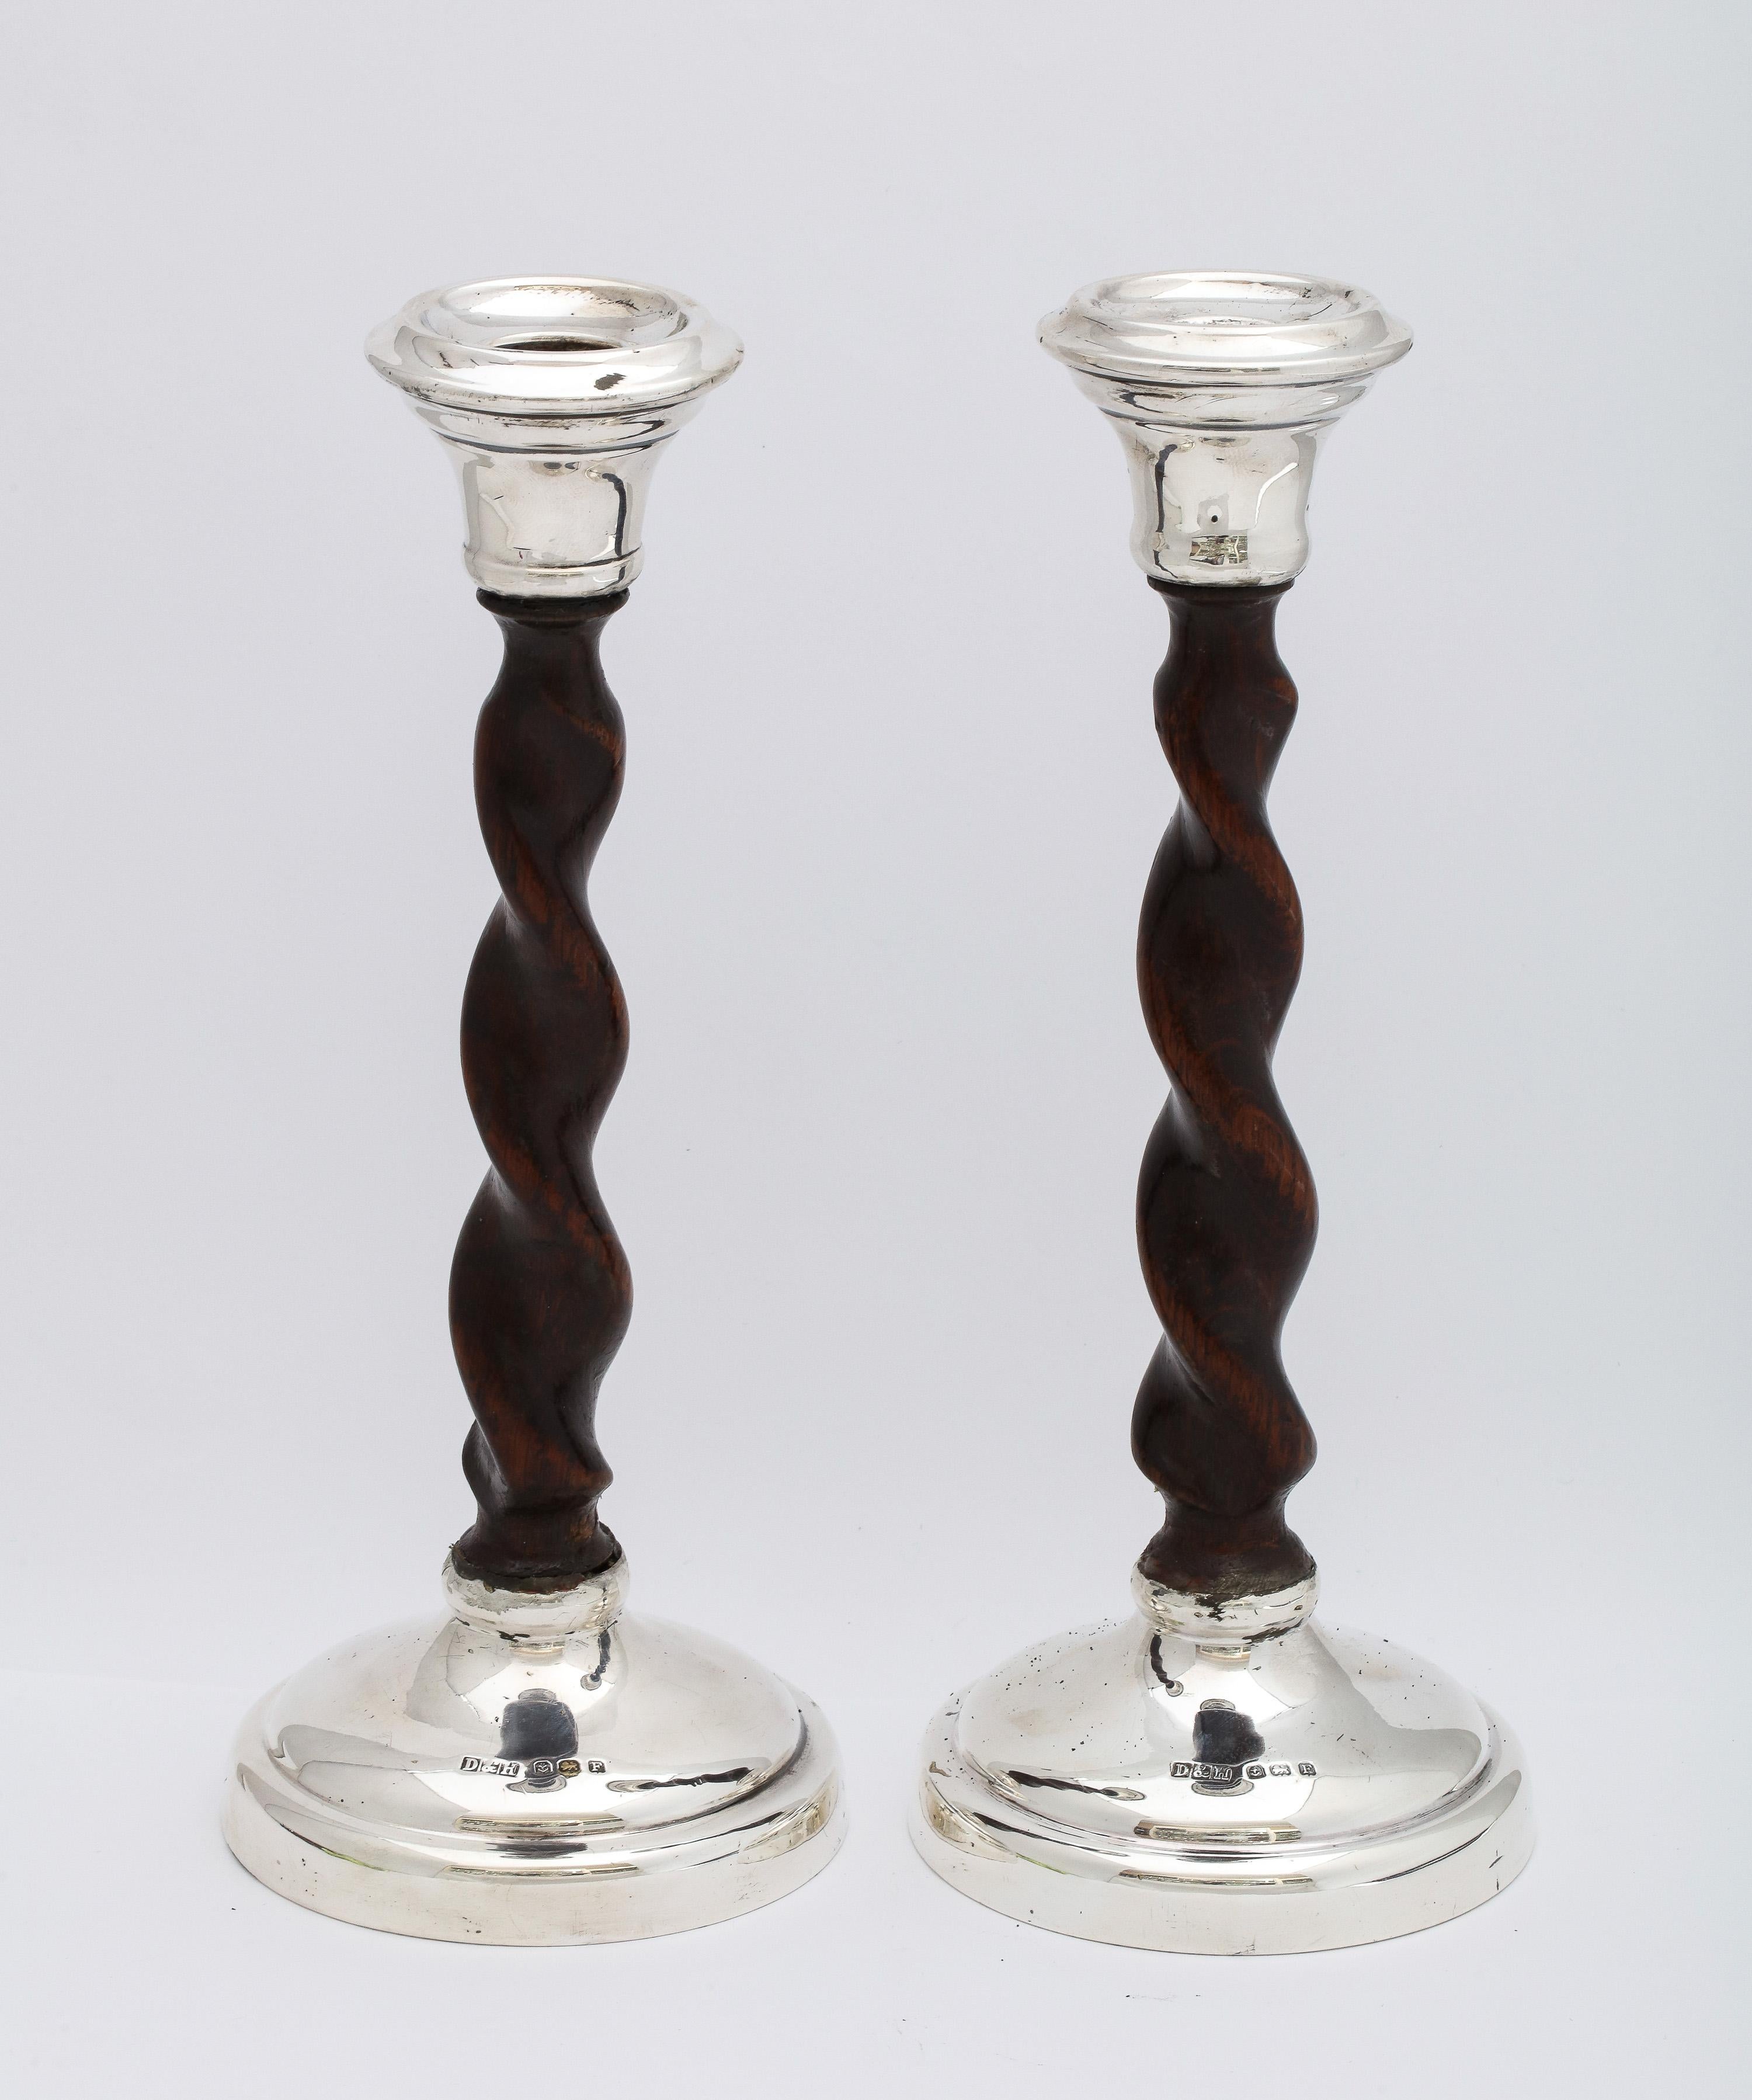 Arts & Crafts Sterling Silver-Mounted Wood Barley Twist Pricket Candlesticks For Sale 13